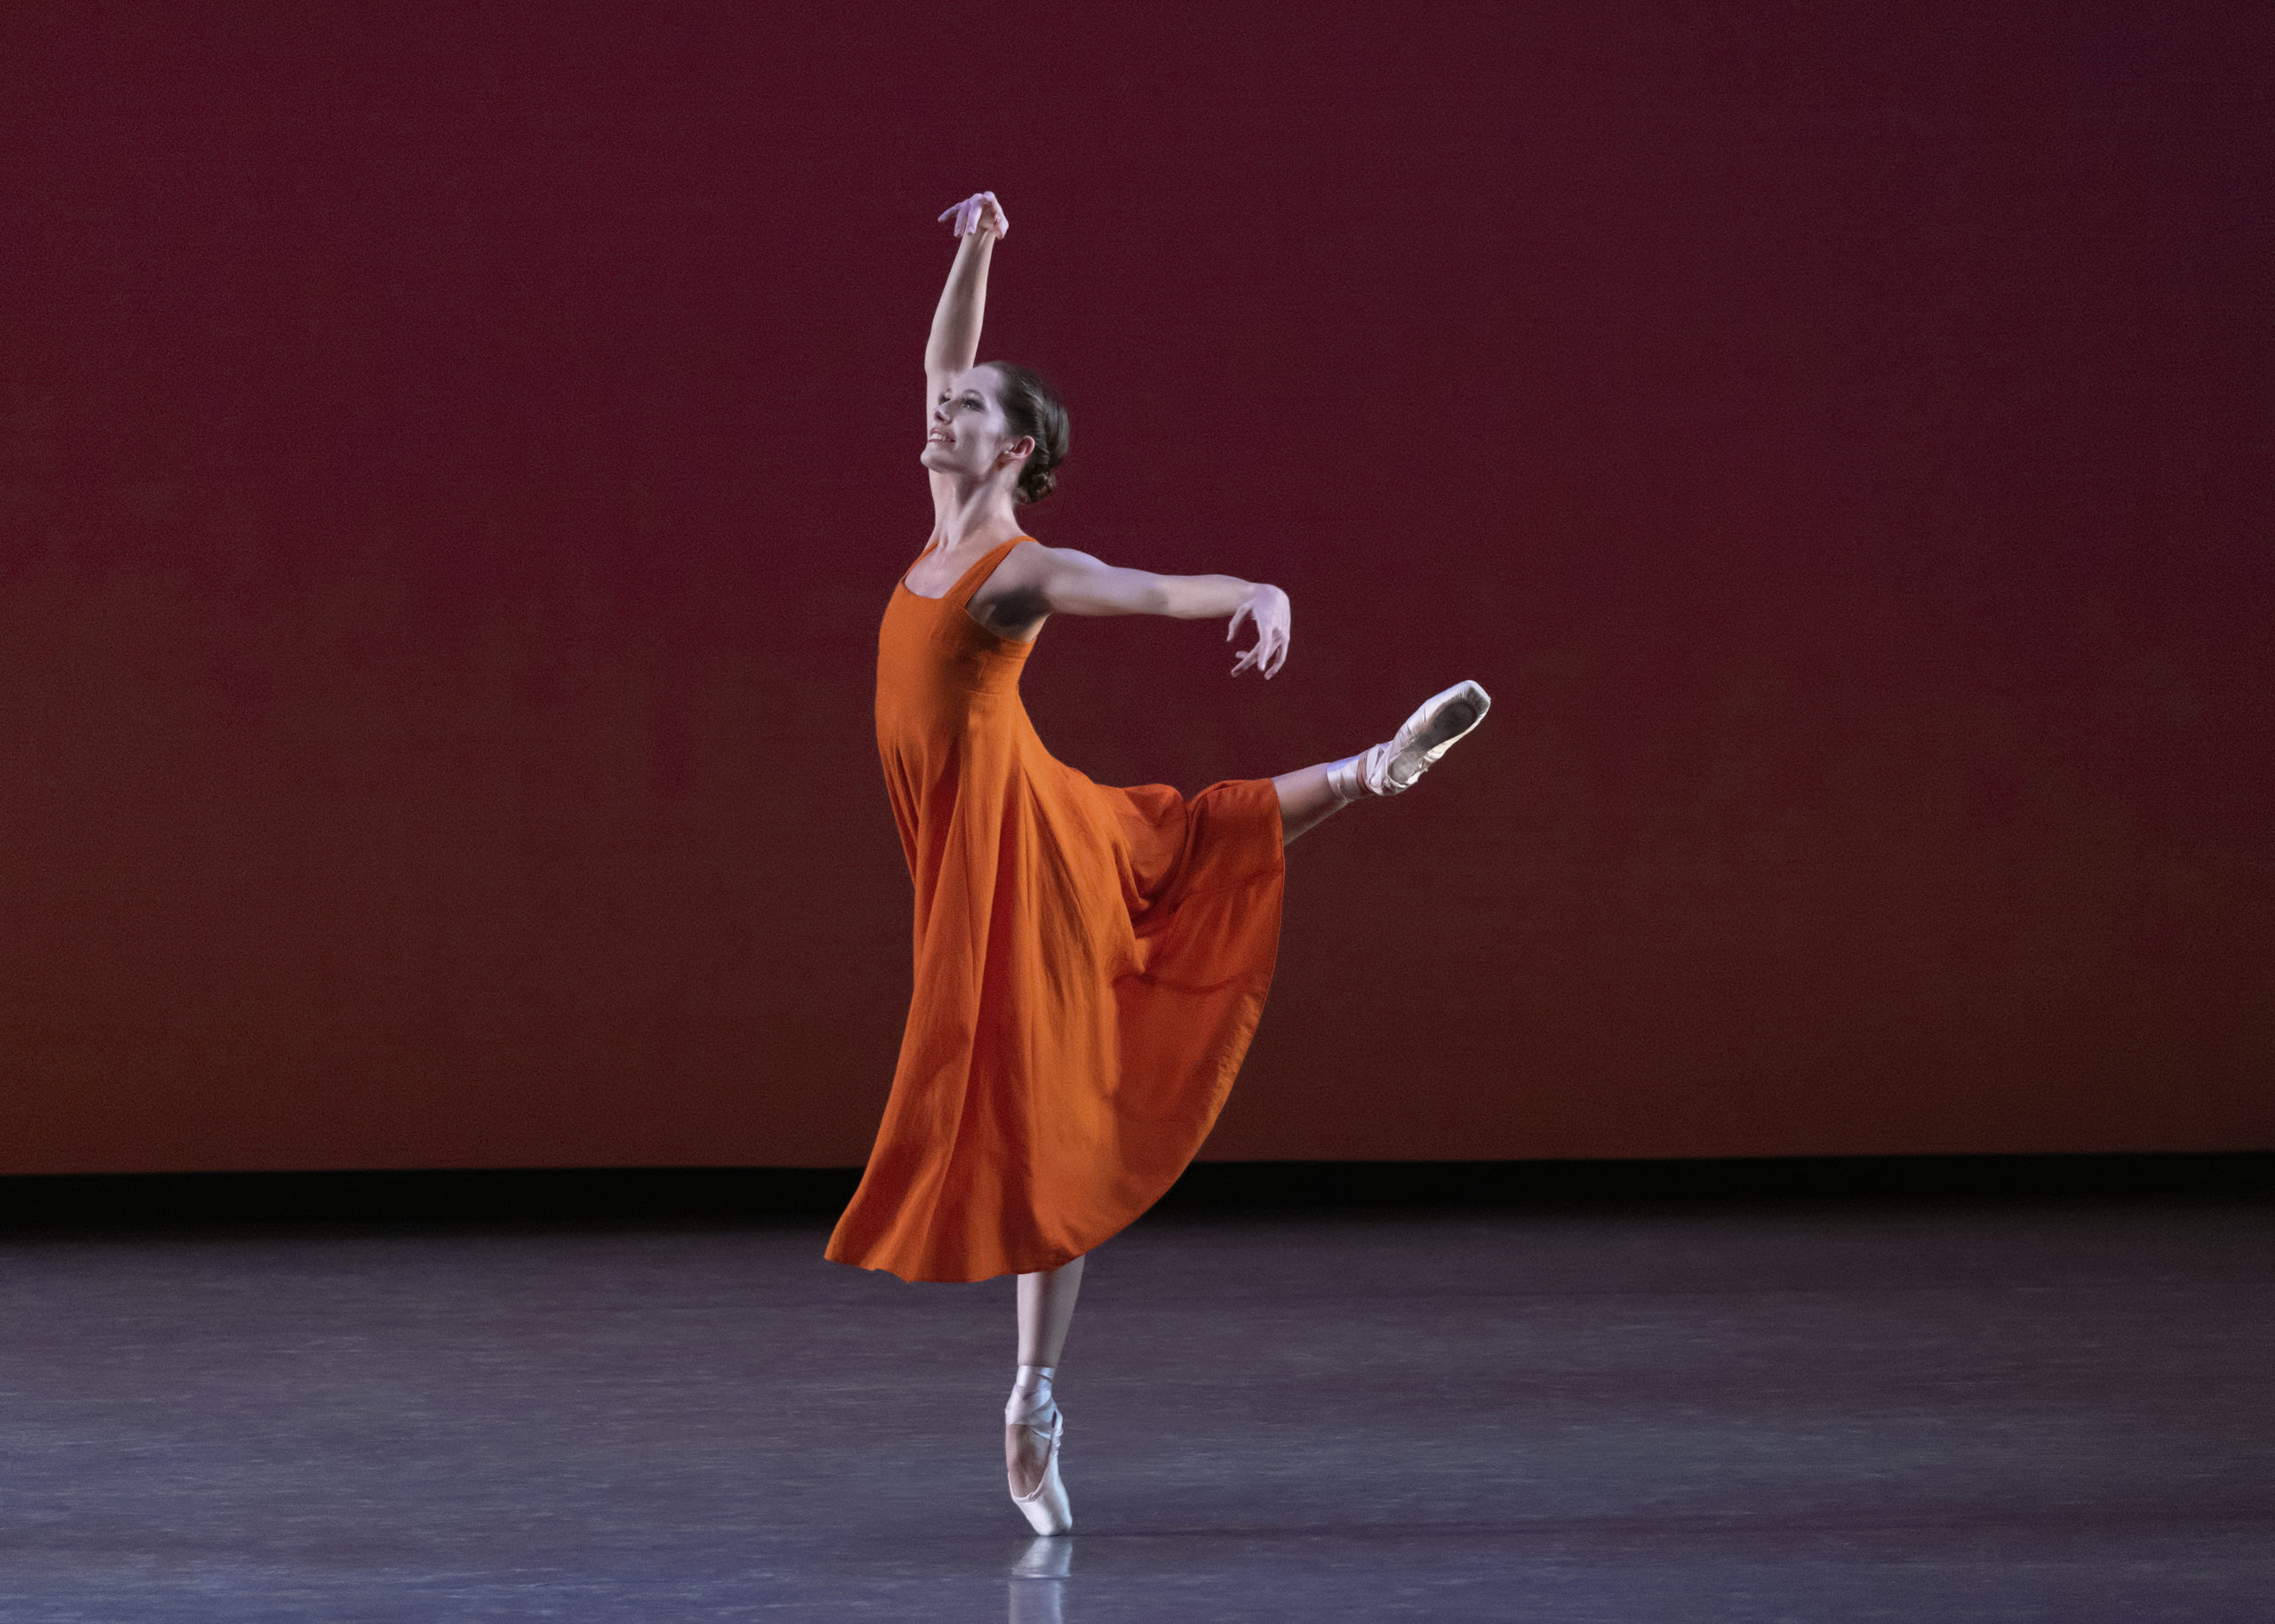 Unity Phelan is shown in profile on pointe raising her right leg behind her in attitude. She holds her right arm high and her left arm out to the side and looks up towards her raised hand. She wears a bright orange dress and dances onstage in front of an orange-brown backdrop.